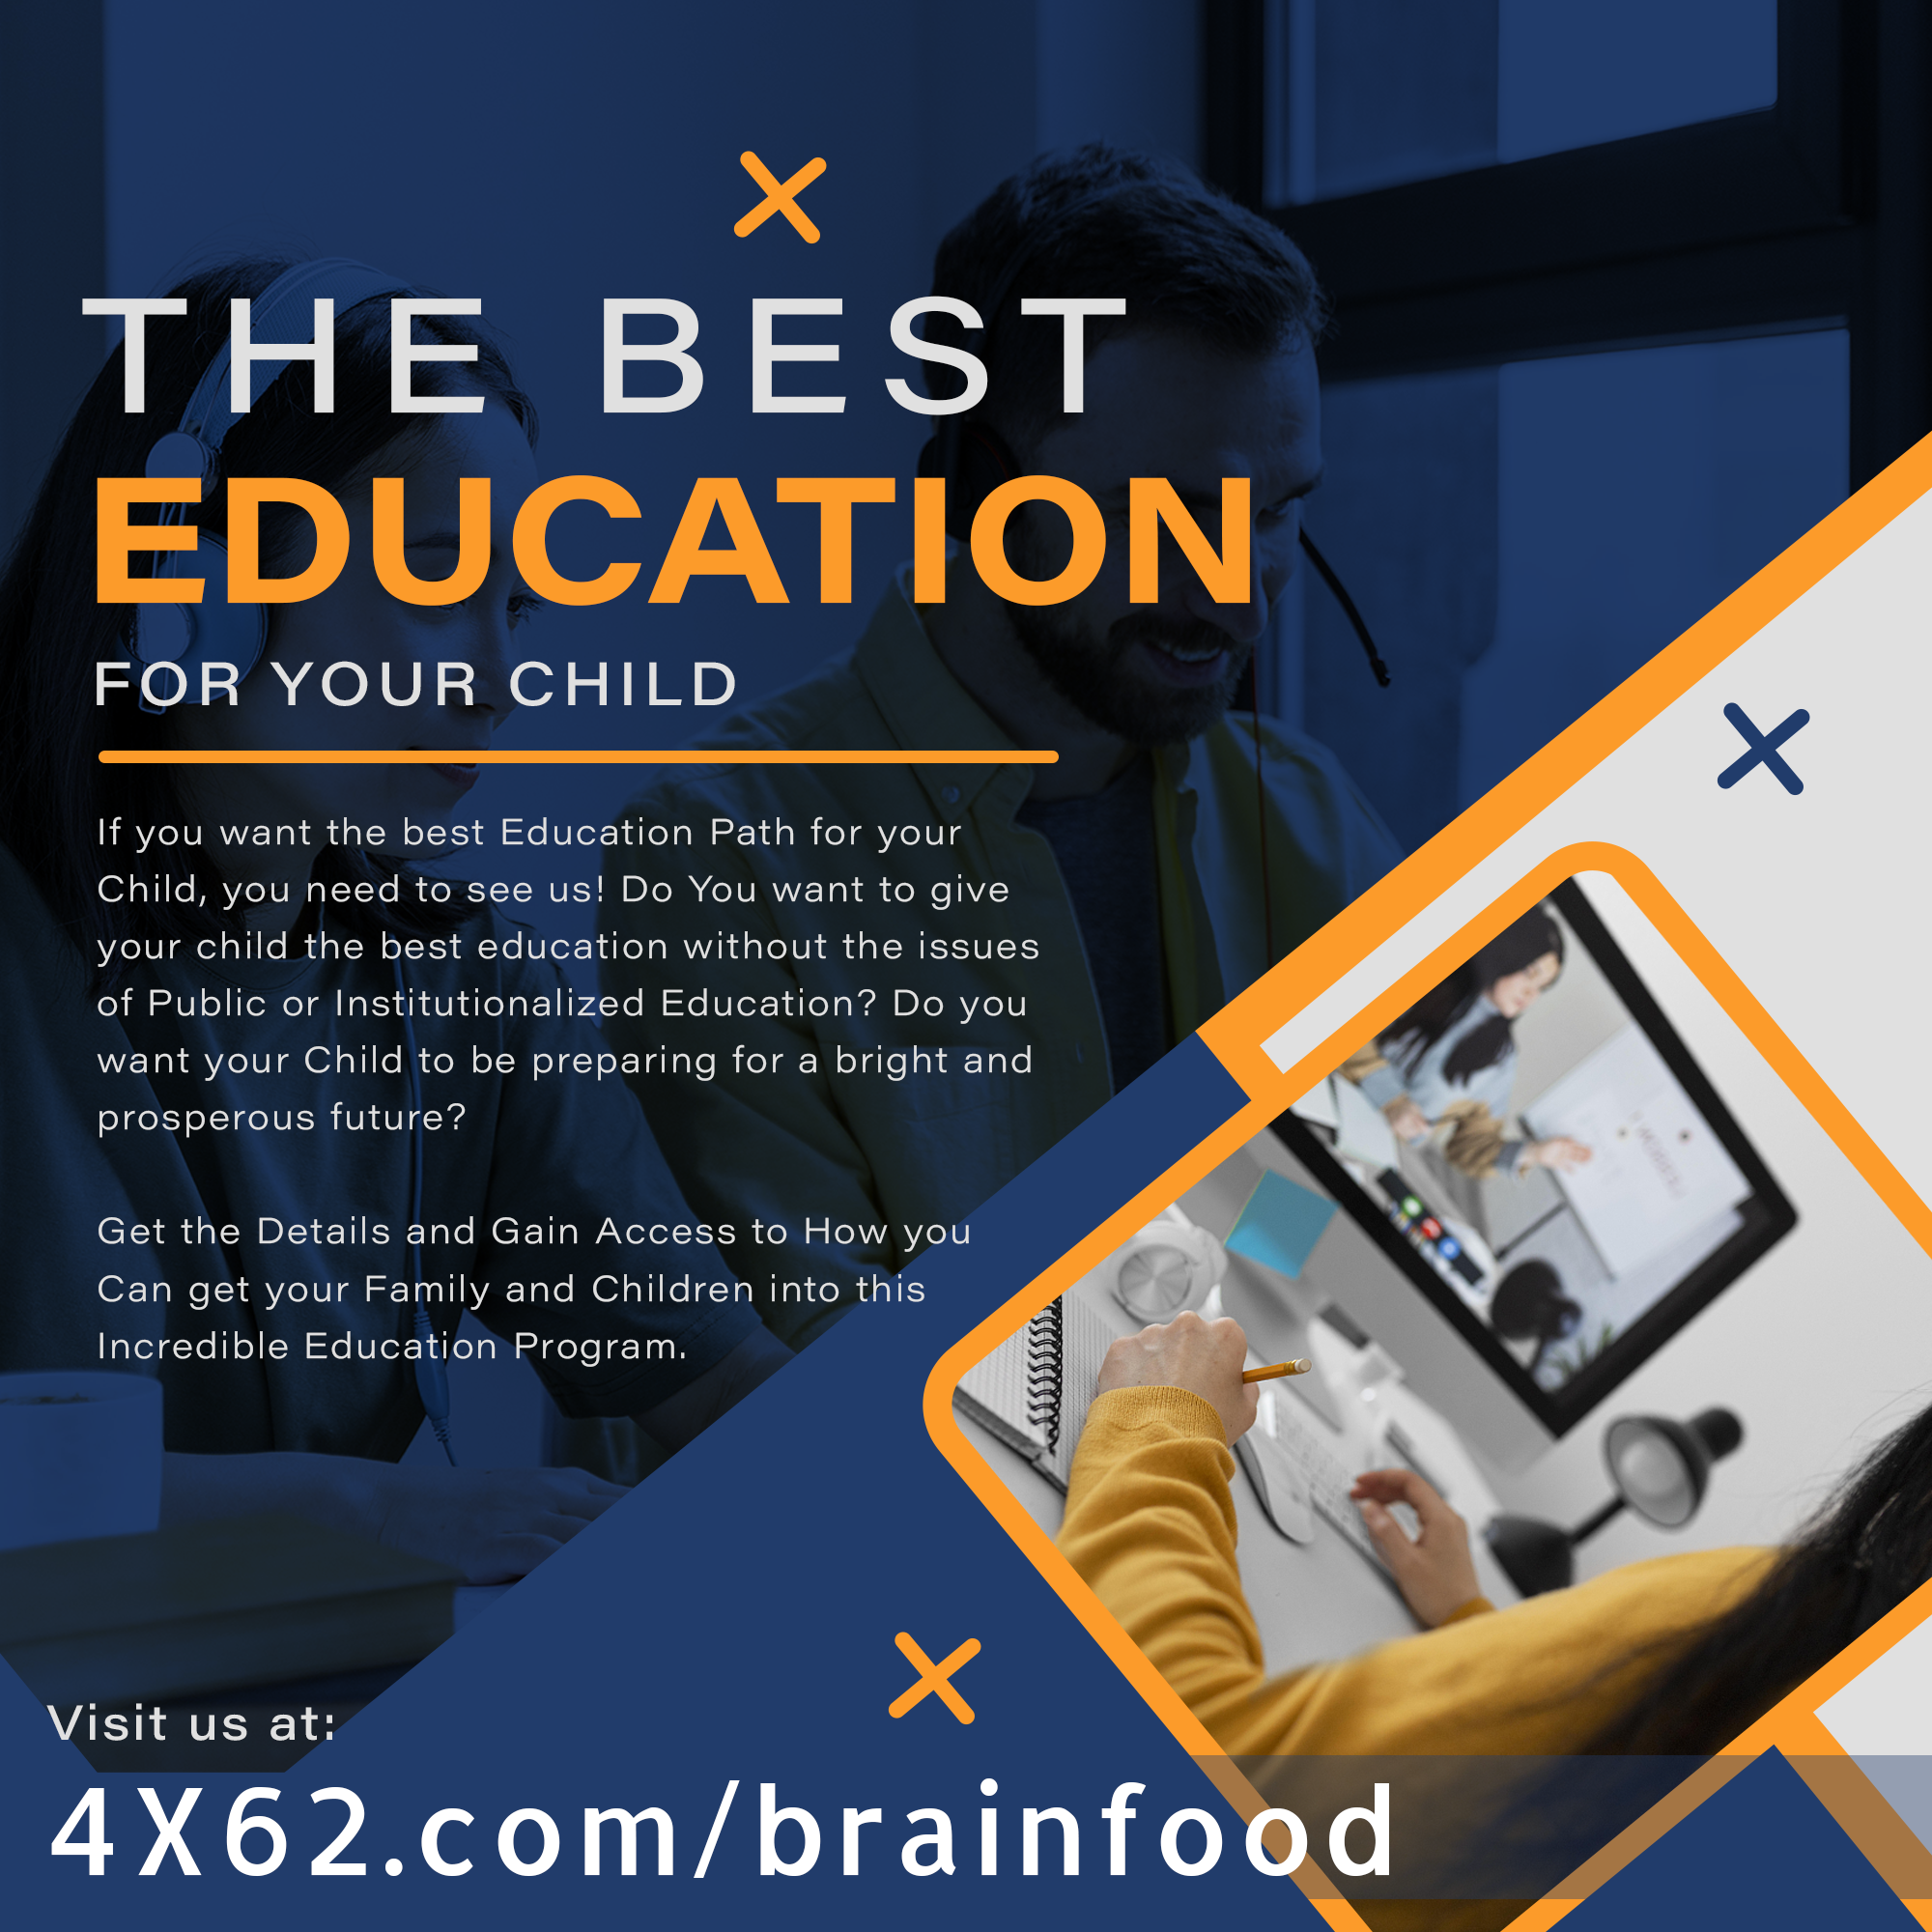 Brainfood Academy: Home Schooling. A poster offering the Best Education